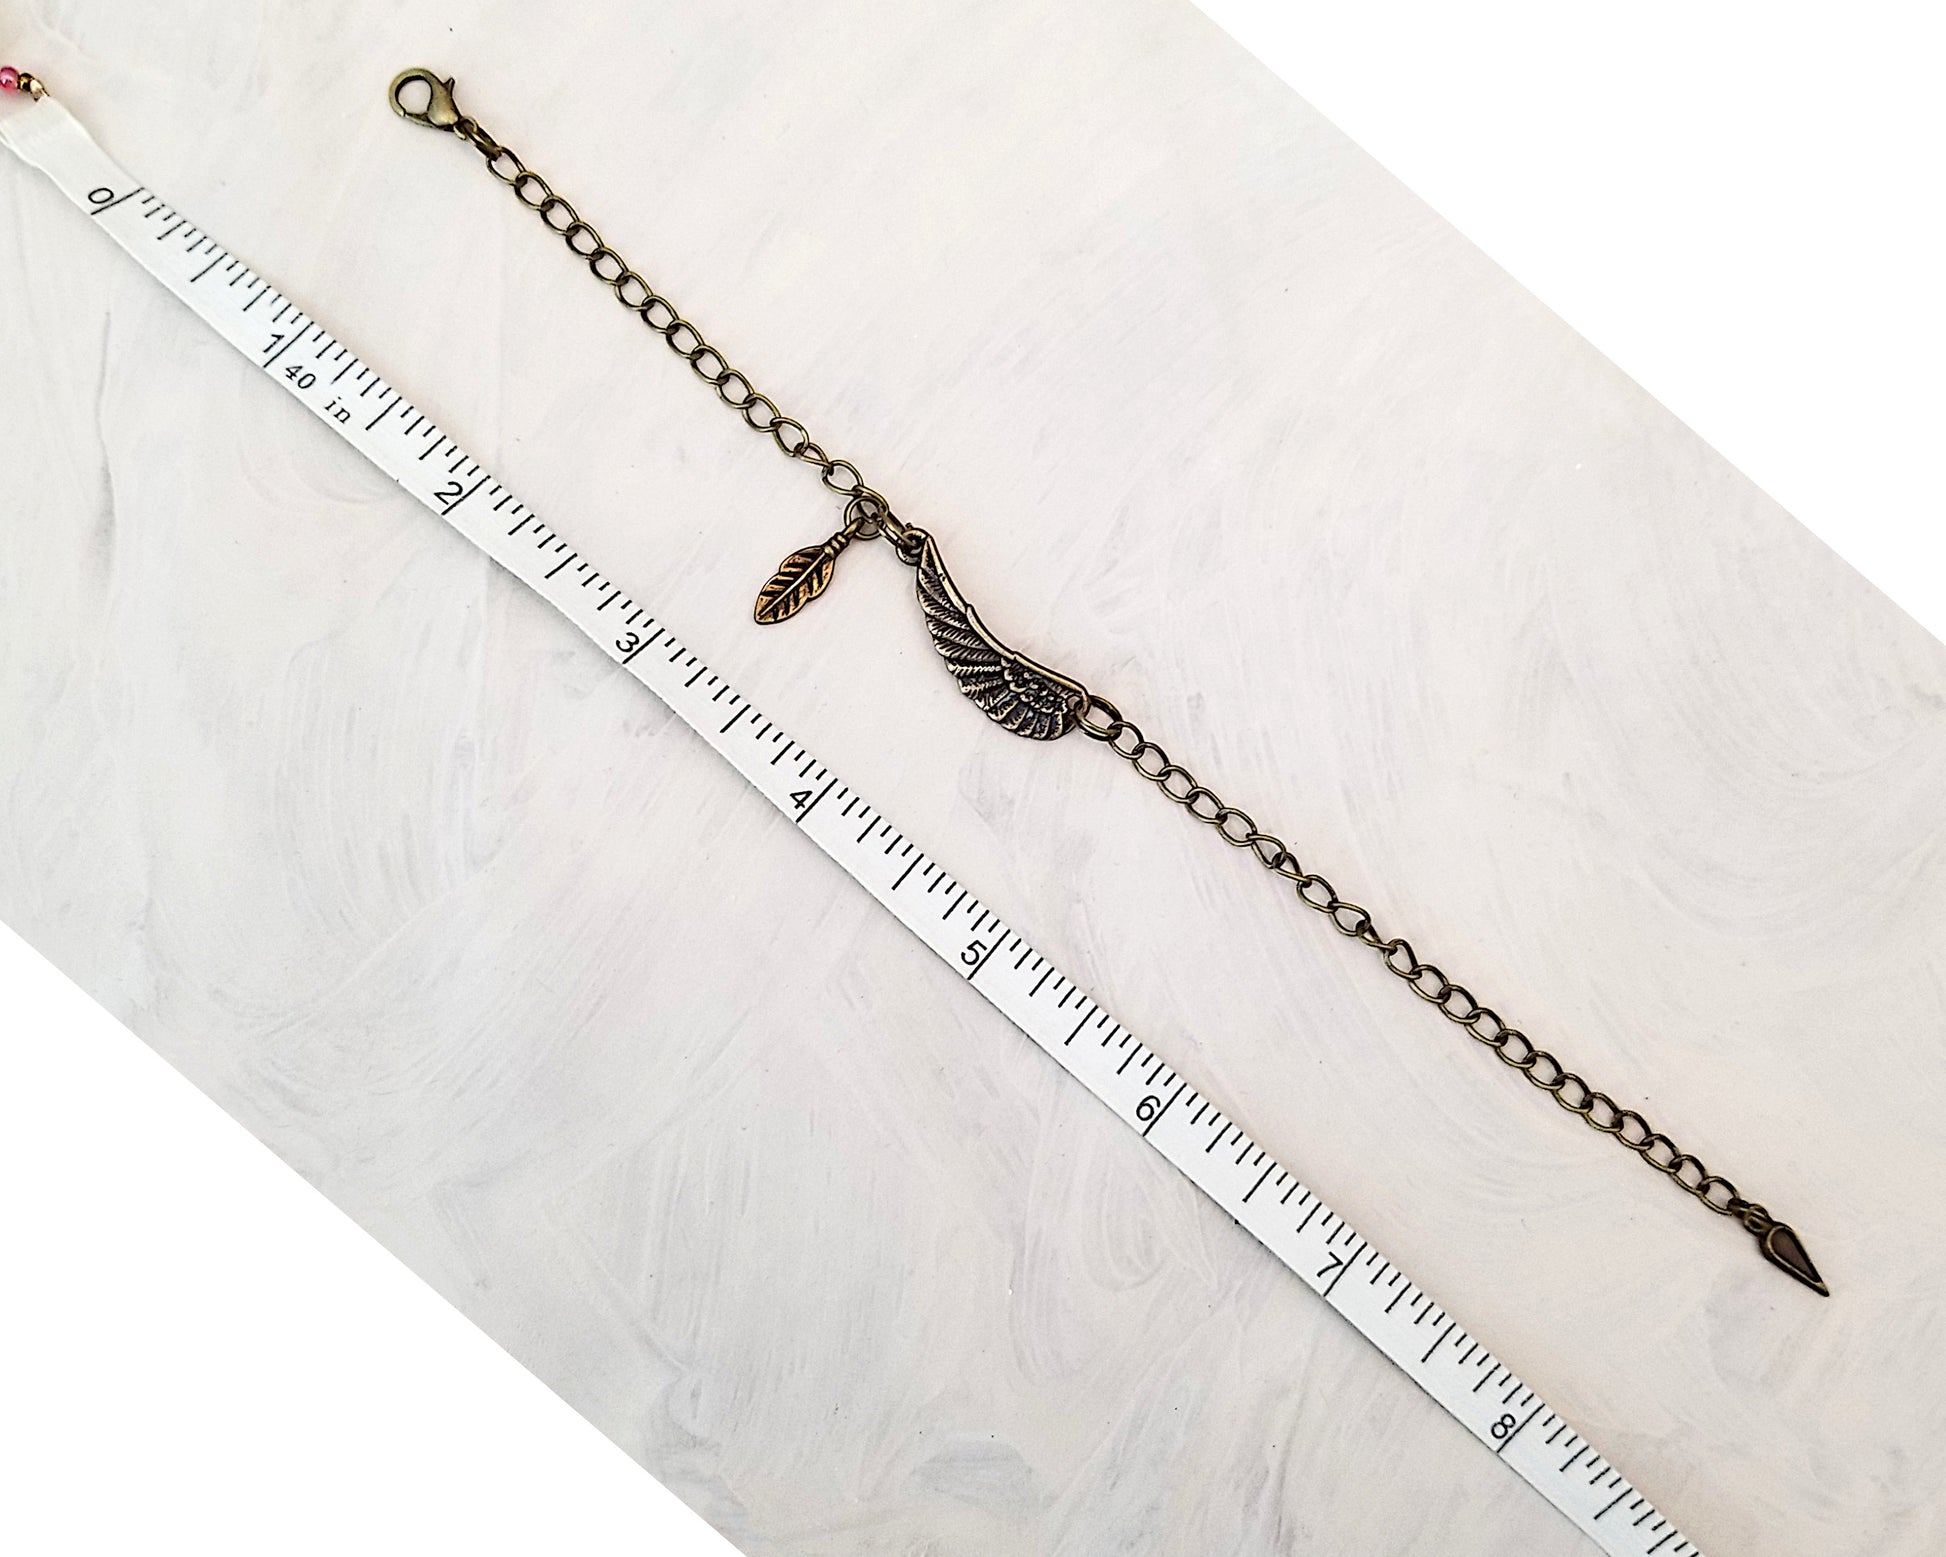 Simple Chain Choker, Bracelet or Anklet with Wing and Feather, Unisex, Choice of Colors, Lobster Clasp, Adjustable, Customized Length